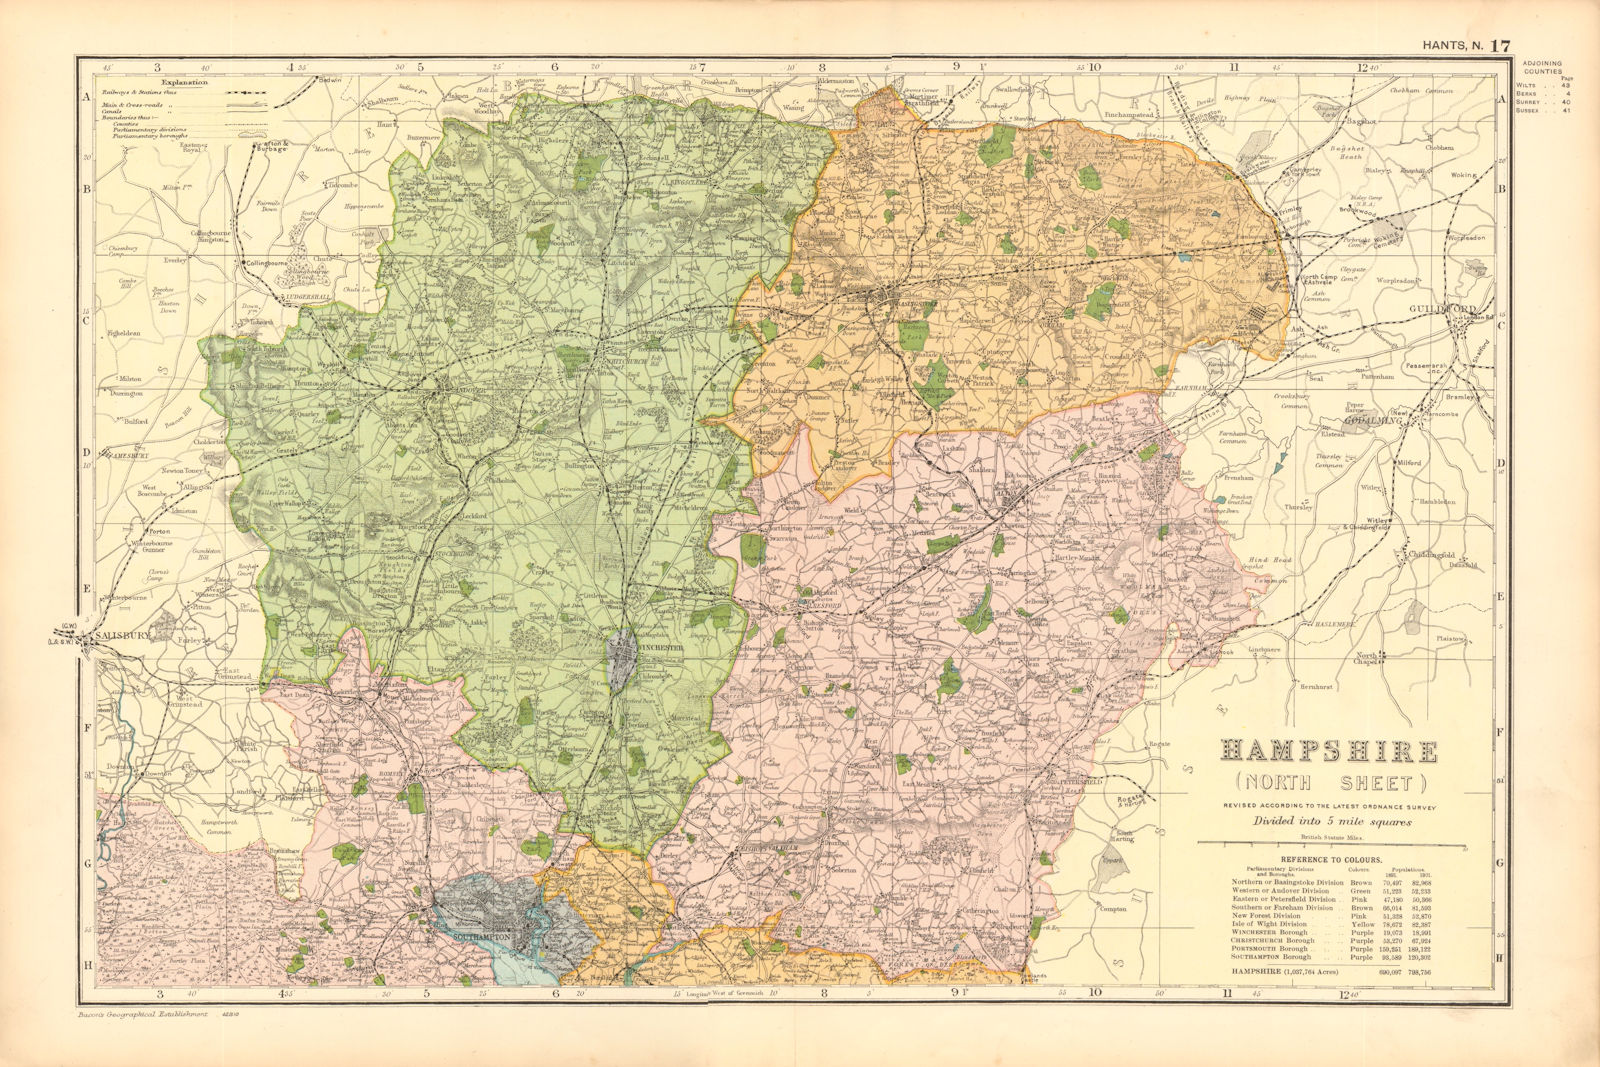 Associate Product HAMPSHIRE (NORTH). Showing Parliamentary divisions & parks. BACON 1904 old map